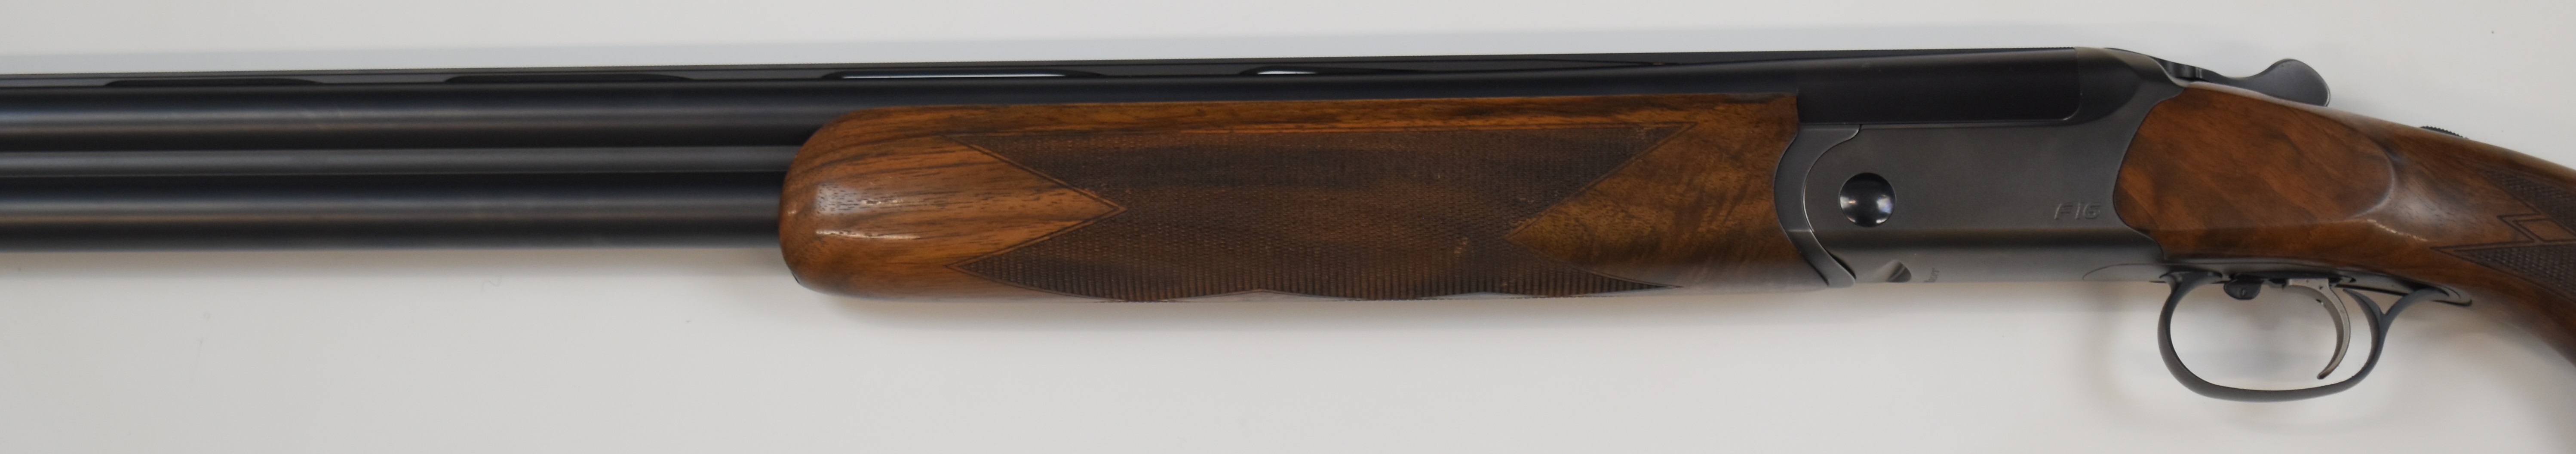 Blaser F16 12 bore over under ejector shotgun with named locks and underside, chequered semi- - Image 9 of 22